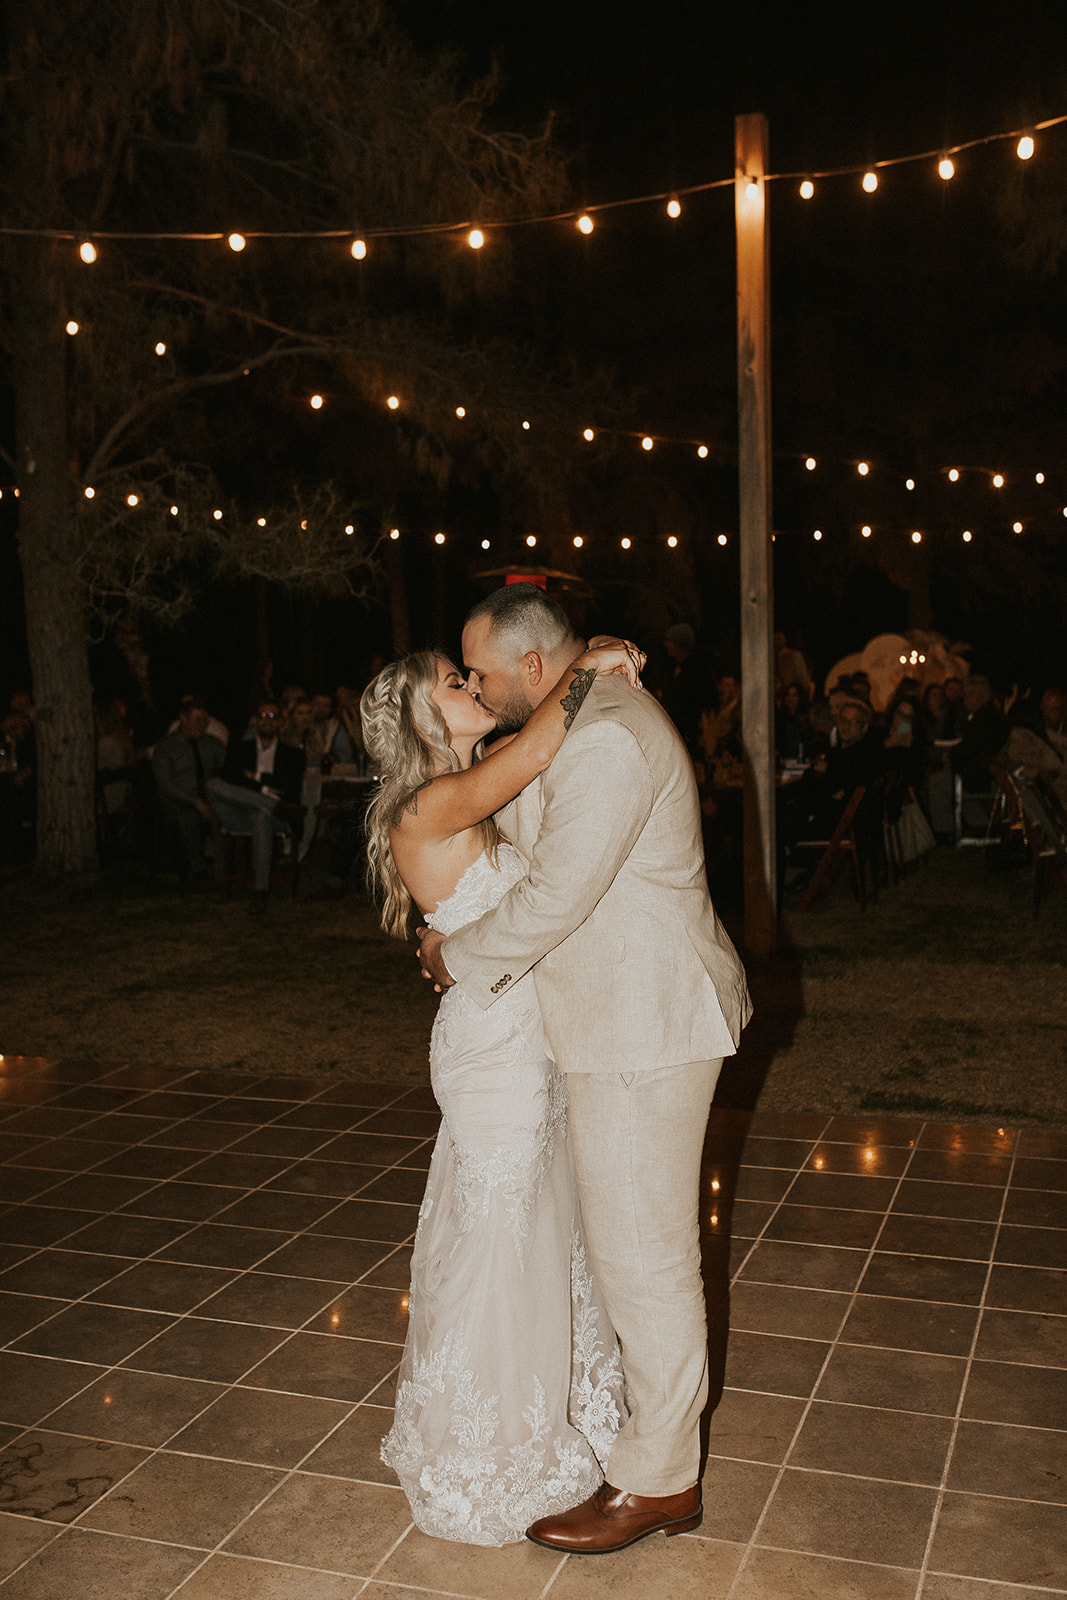 bridal couple kissing on dance floor with string lights above them 